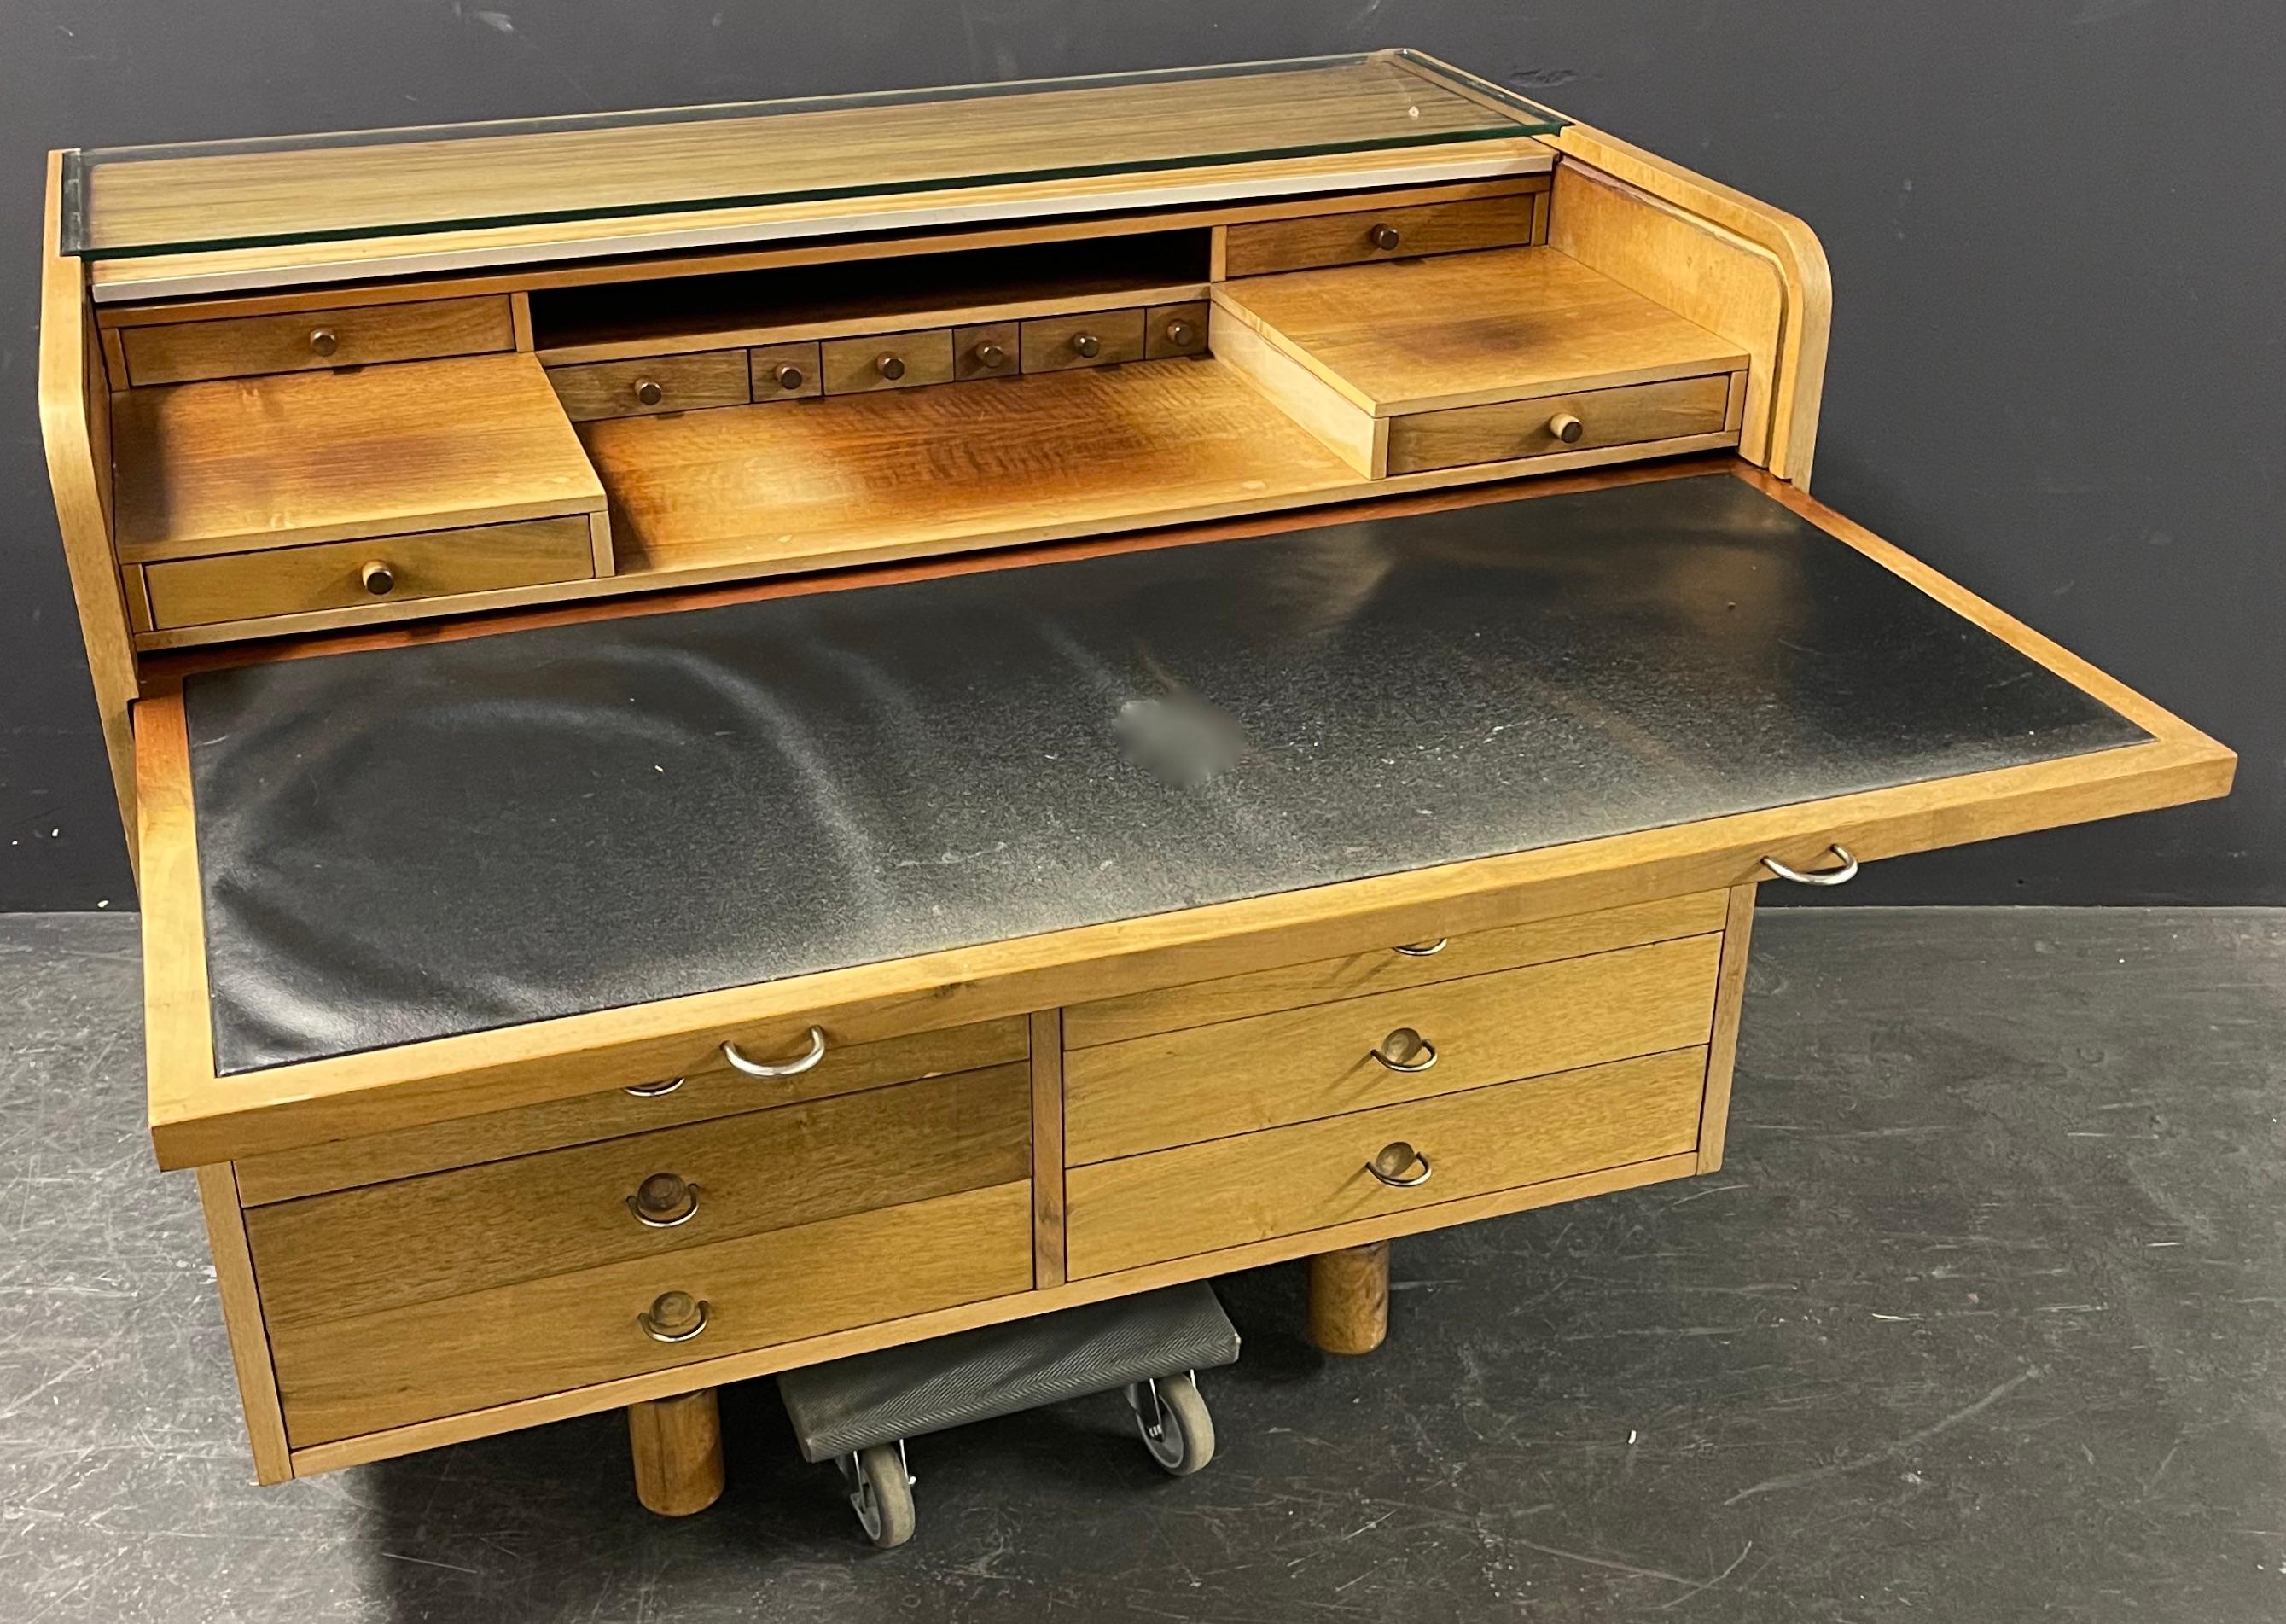 Walnut writing desk model 804 designed in 1961 by Gianfranco Frattini for Bernini, Italy. Tambour top that hides small drawers and a pull out leather writing surface. Front side with ten drawers and four open spaces on back side. Can be used as